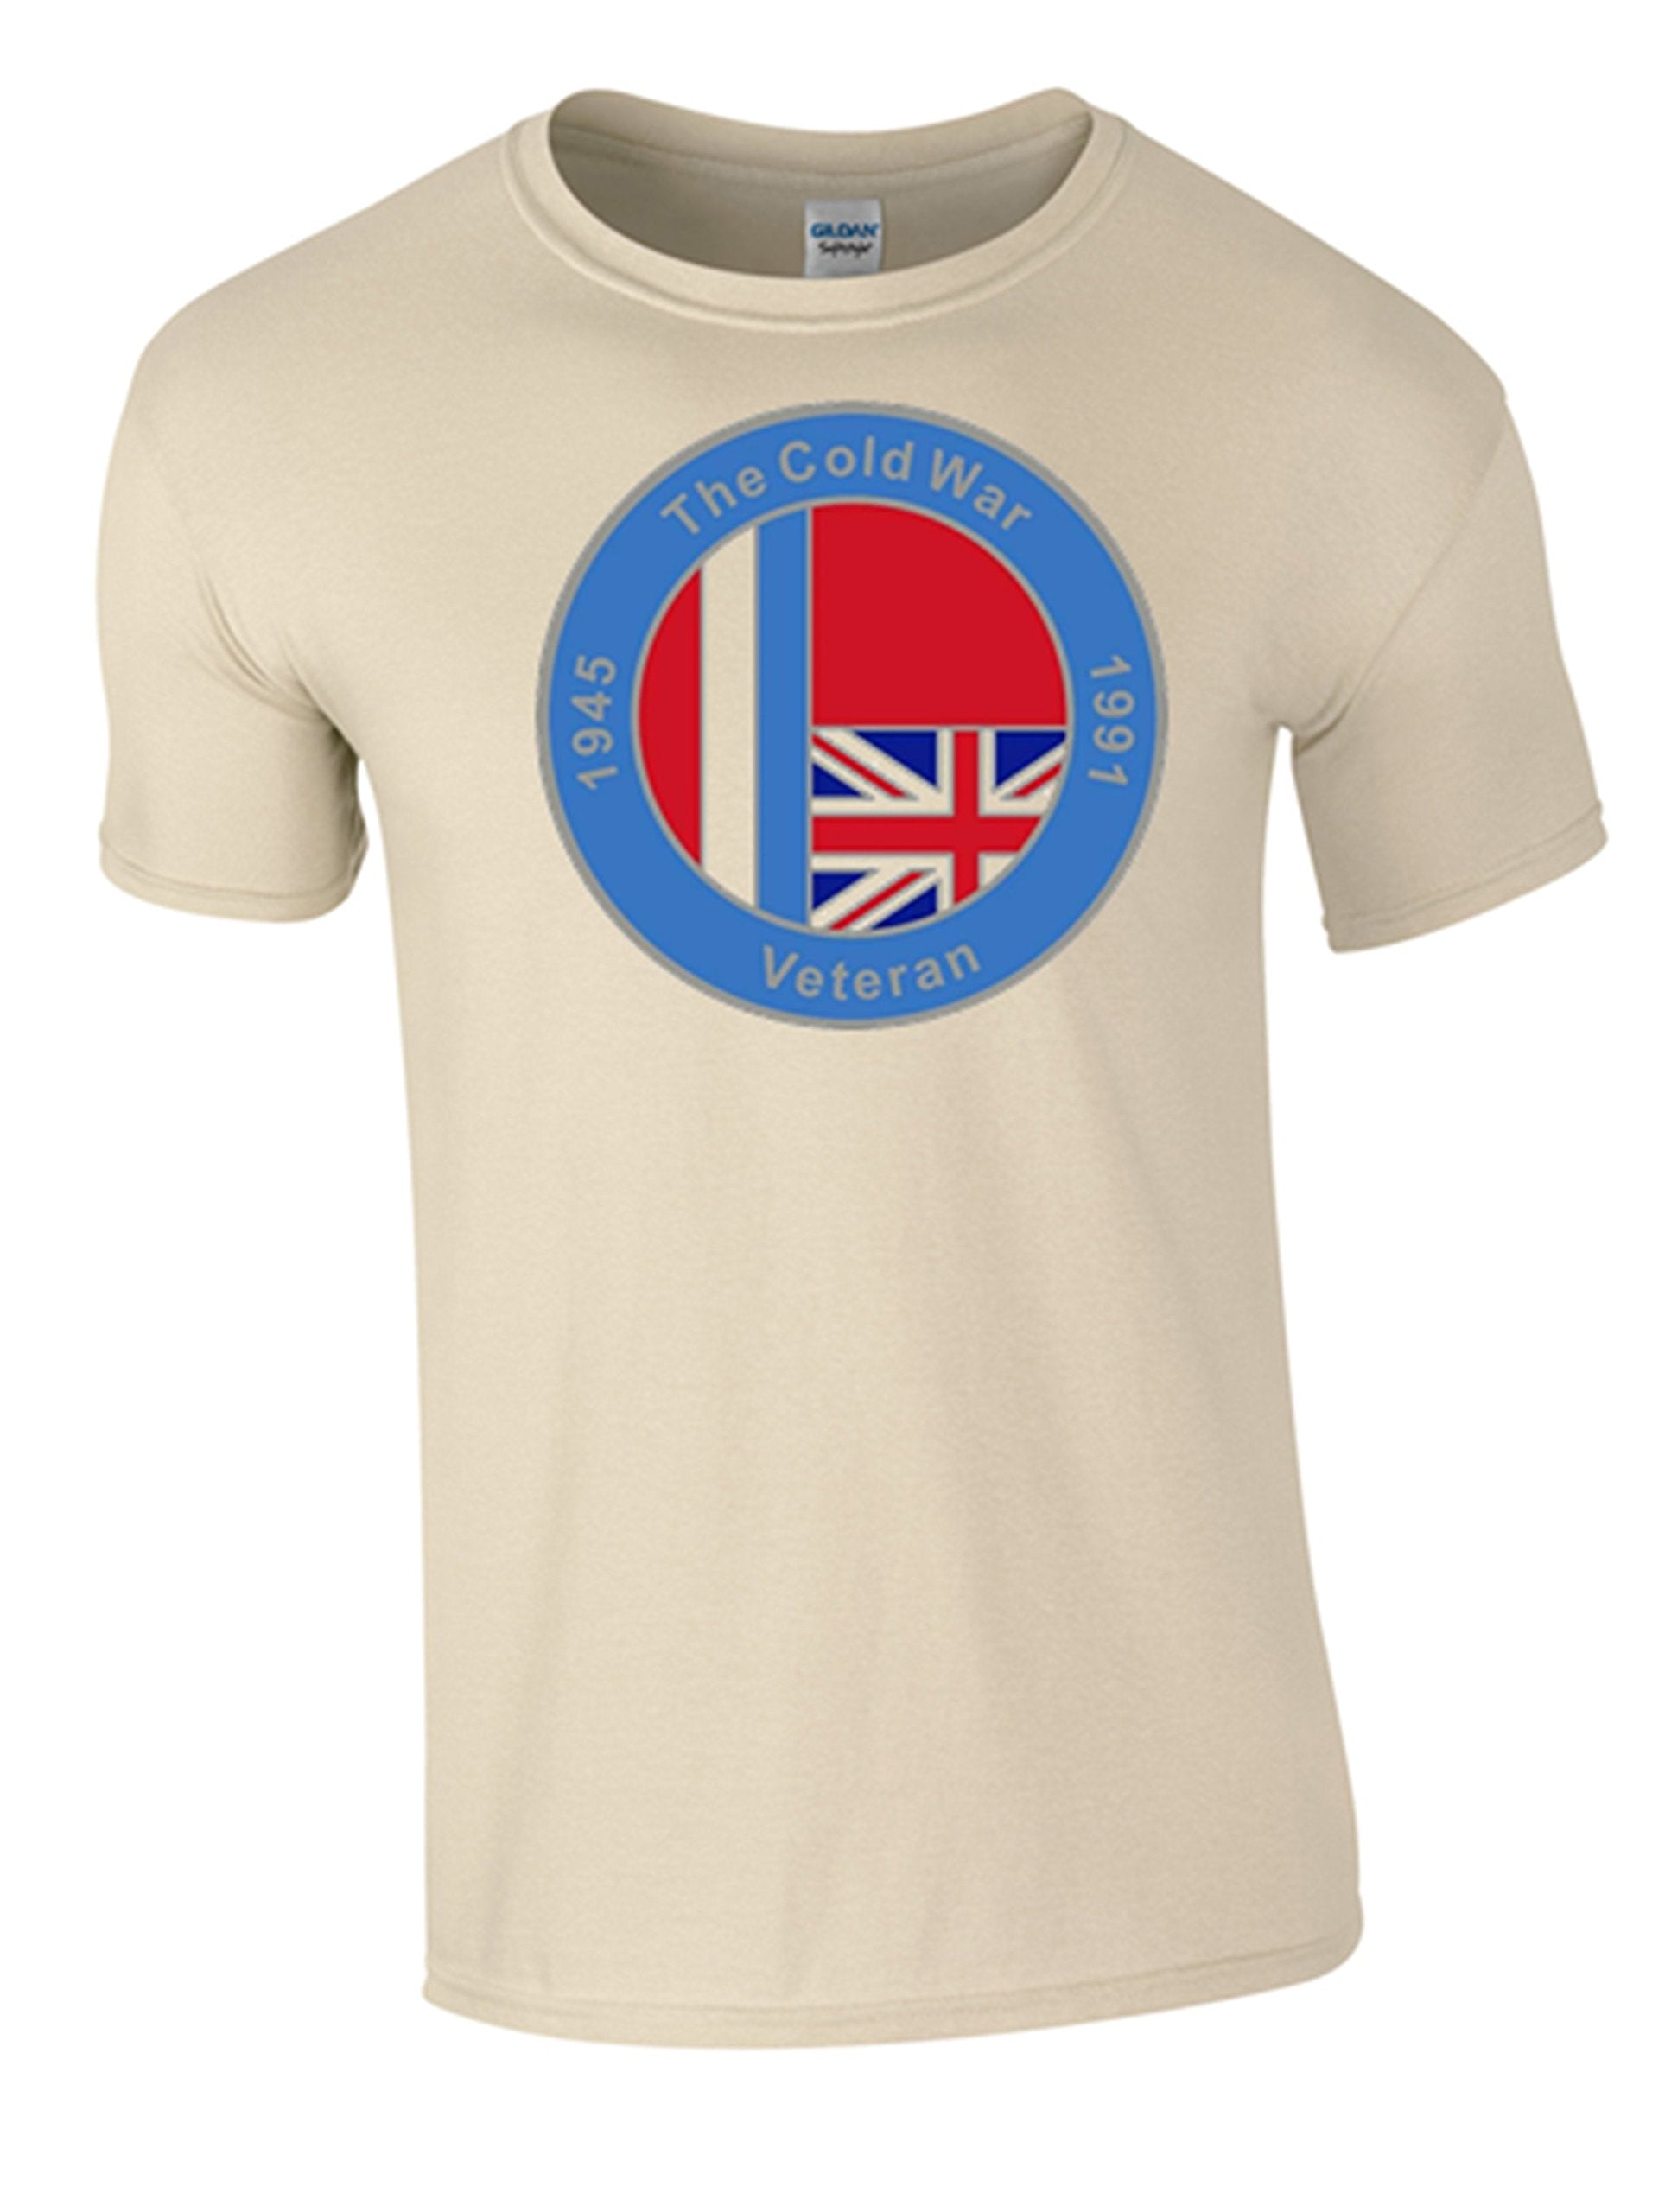 Bear Essentials Clothing. Cold War Op Banner T/Shirt (L, Sand) - Army 1157 kit Army 1157 Kit